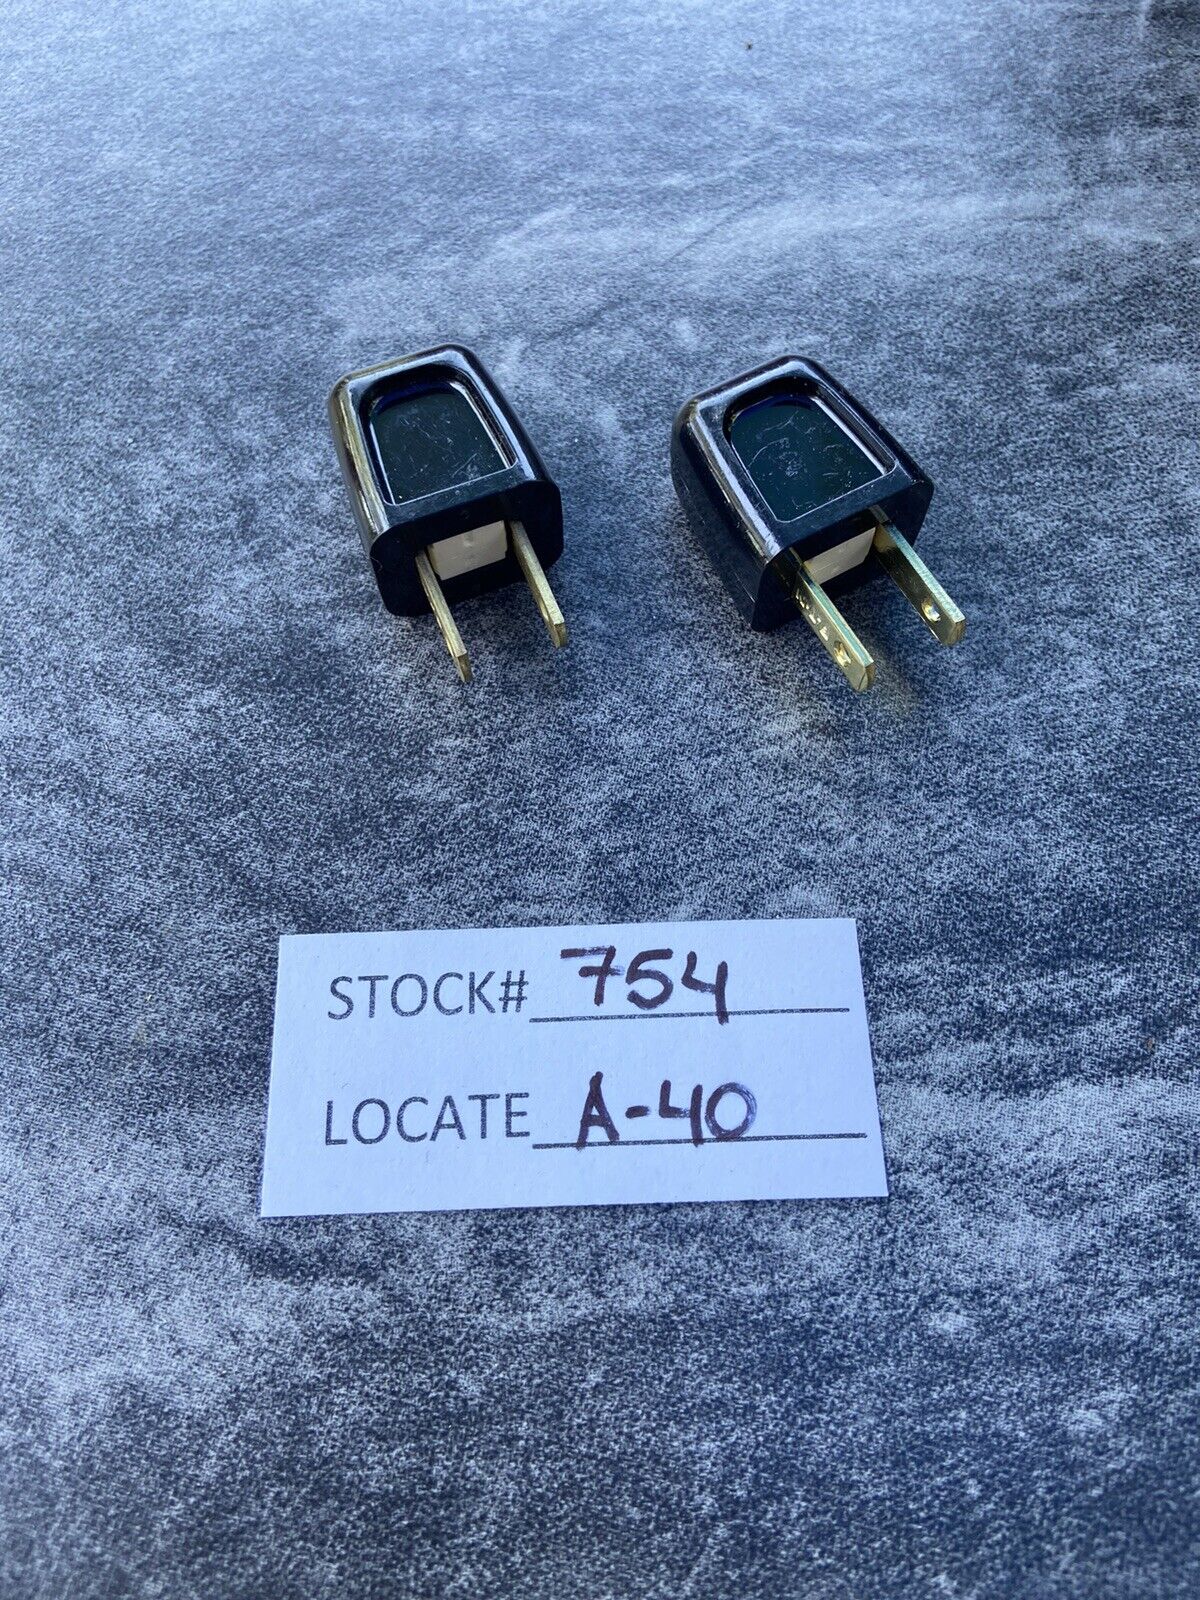 (TWO) Quick connector male Satco 90/1520 Rized Academy Plug Spt1, NEW, FREE S&H.